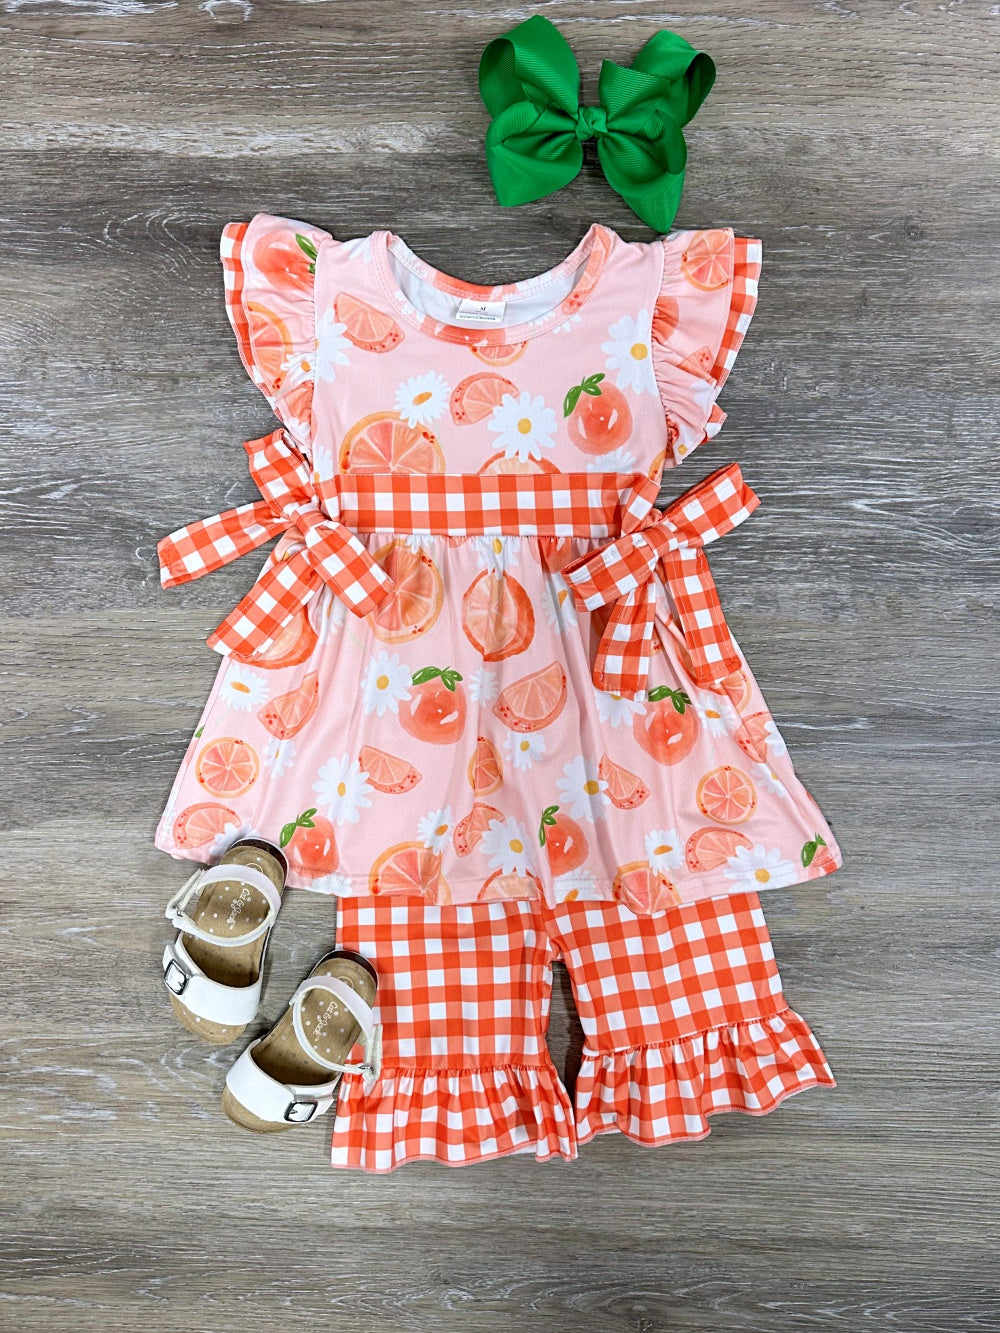 Orange Queen Gingham Plaid Girls Shorts Outfit - Sydney So Sweet